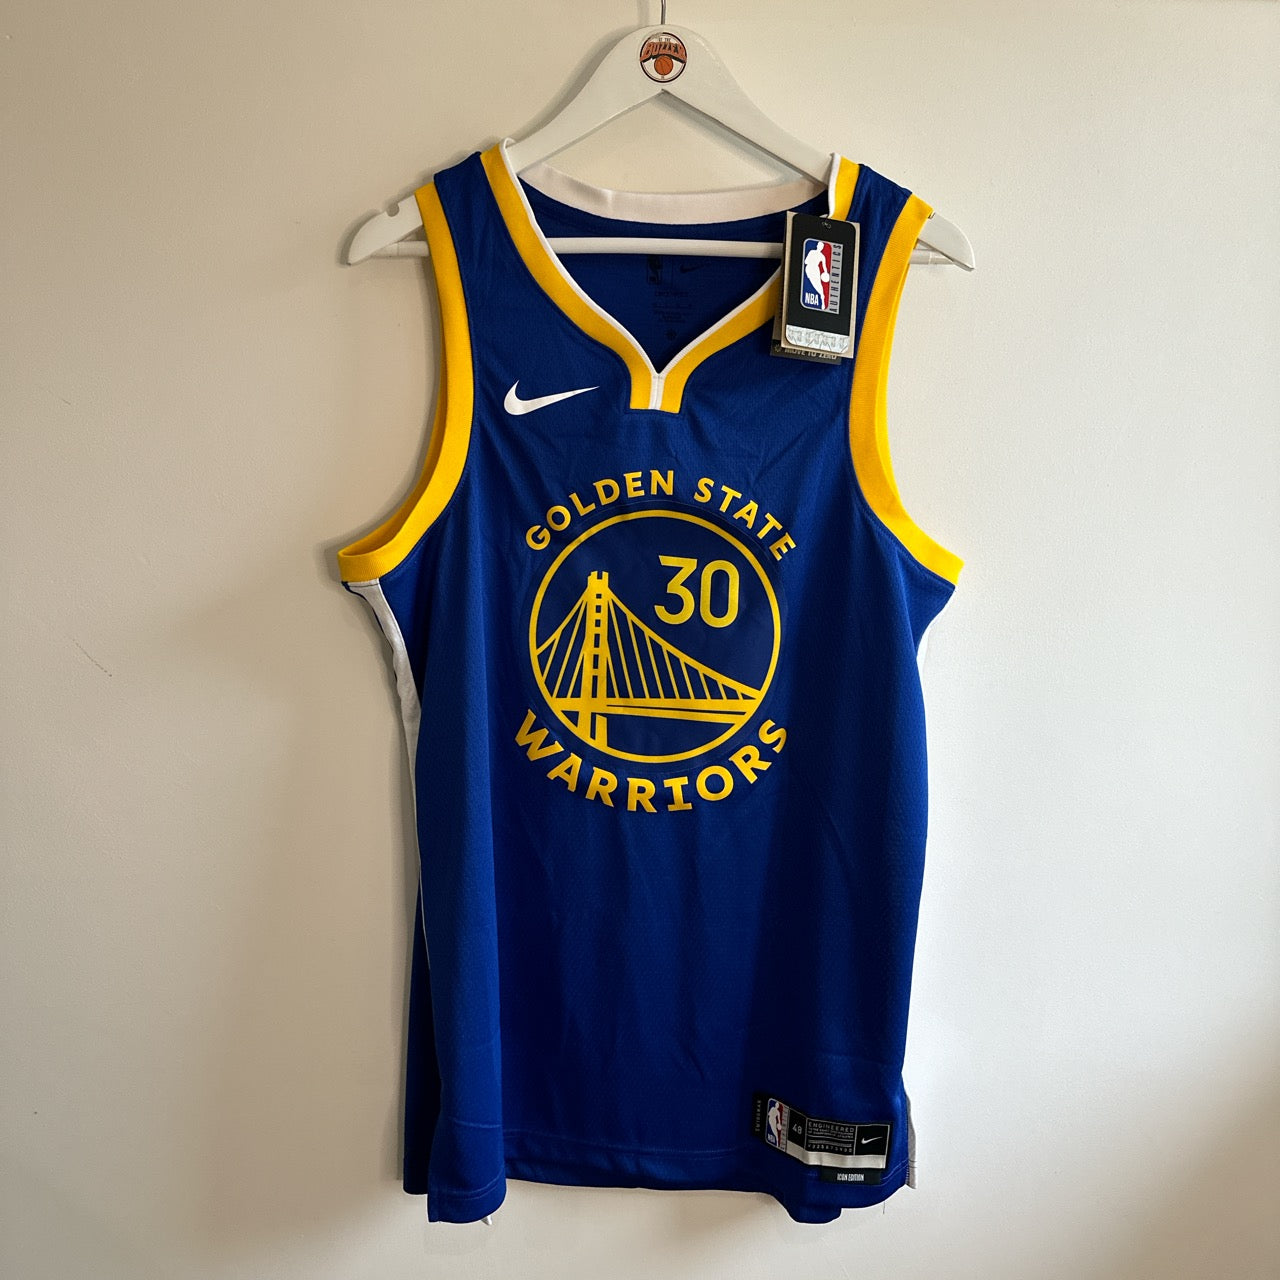 Golden State Warriors Steph Curry Nike jersey - Large